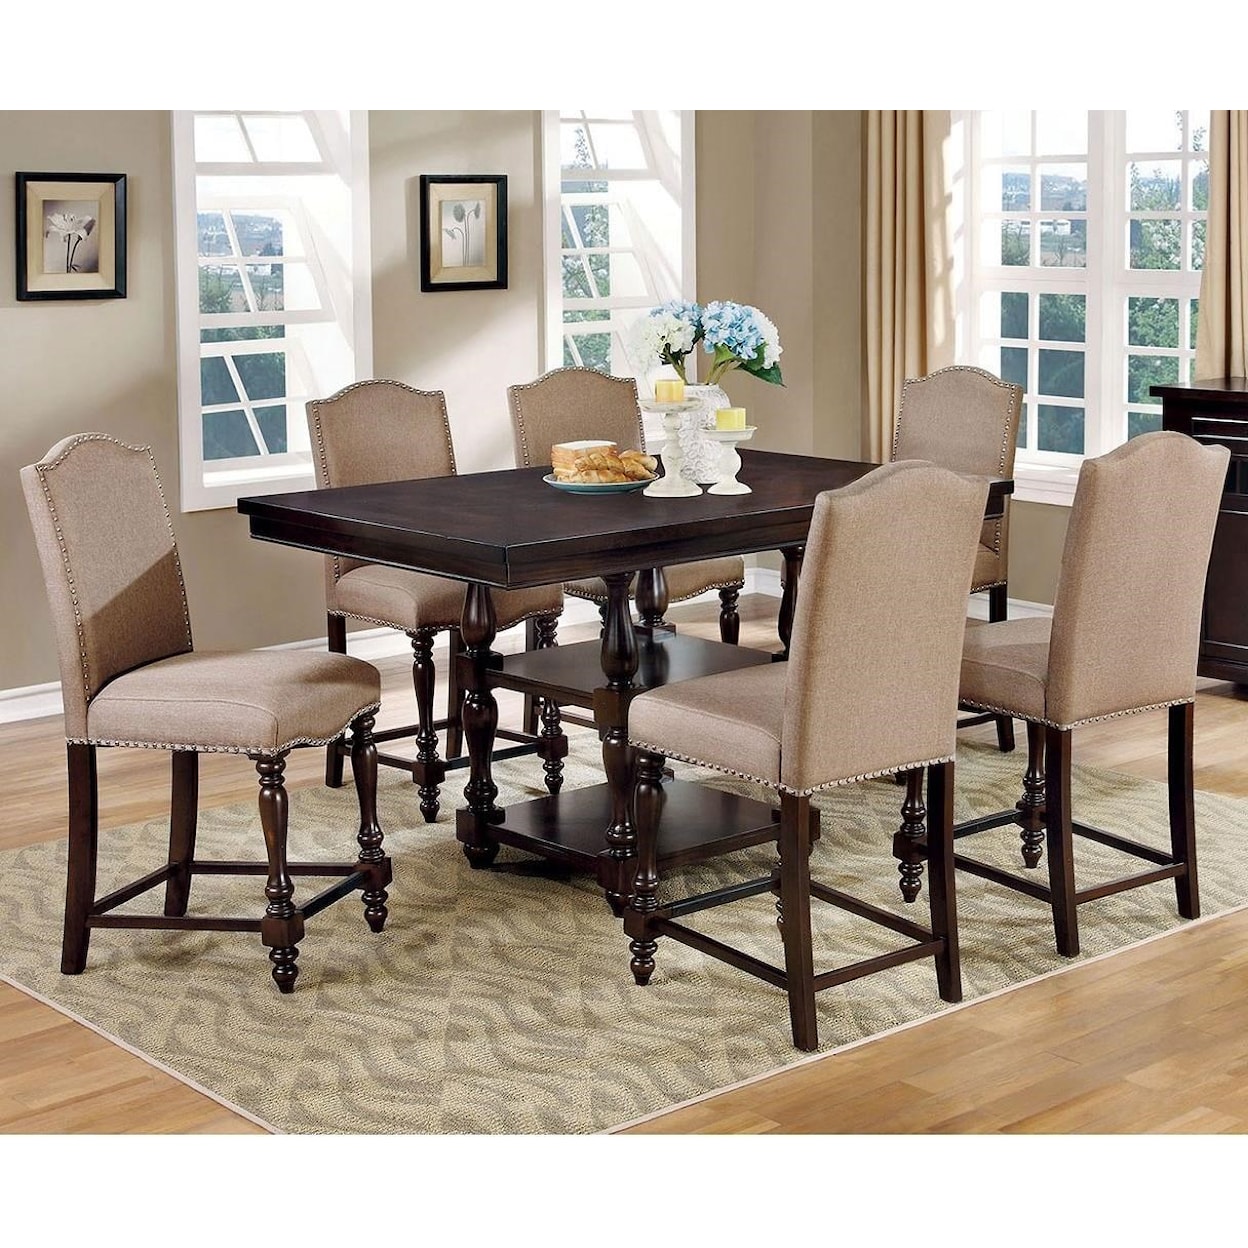 Furniture of America Hurdsfield Table and 6 Chairs